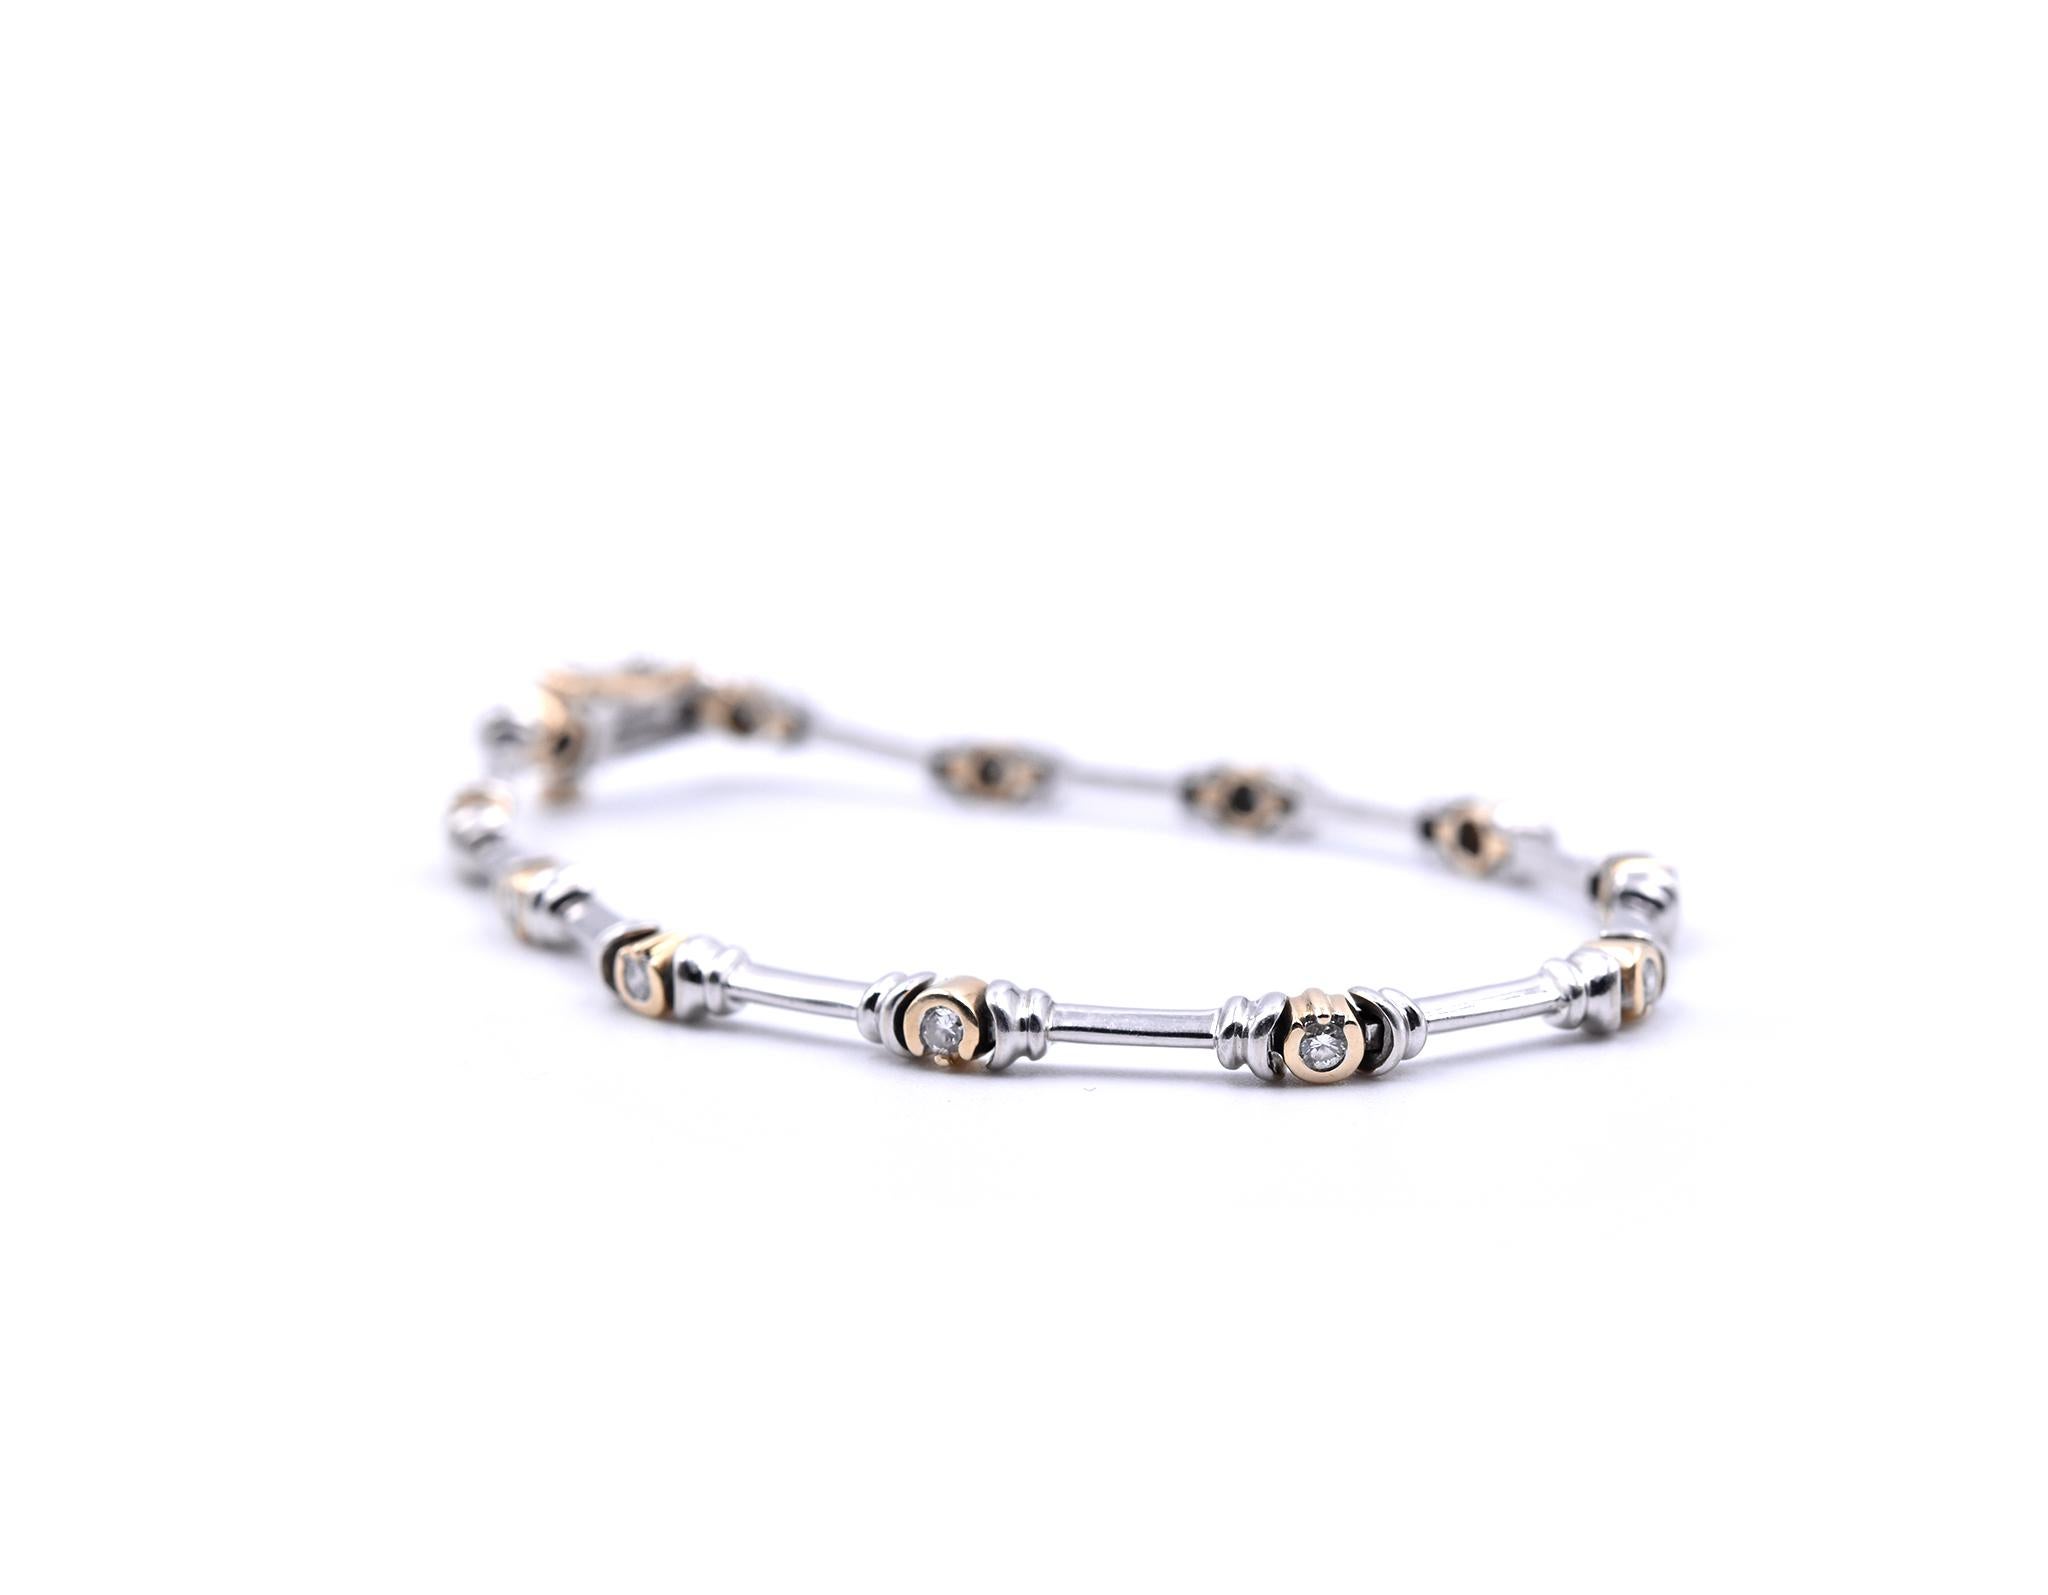 Designer: custom designed
Material: 14k yellow/white gold
Diamonds: 12 round brilliant cuts = 0.60cttw
Color: H
Clarity: SI1-SI2
Dimensions: bracelet is 7 inches in length, and measures 3.72mm in width
Weight: 10.89 grams
